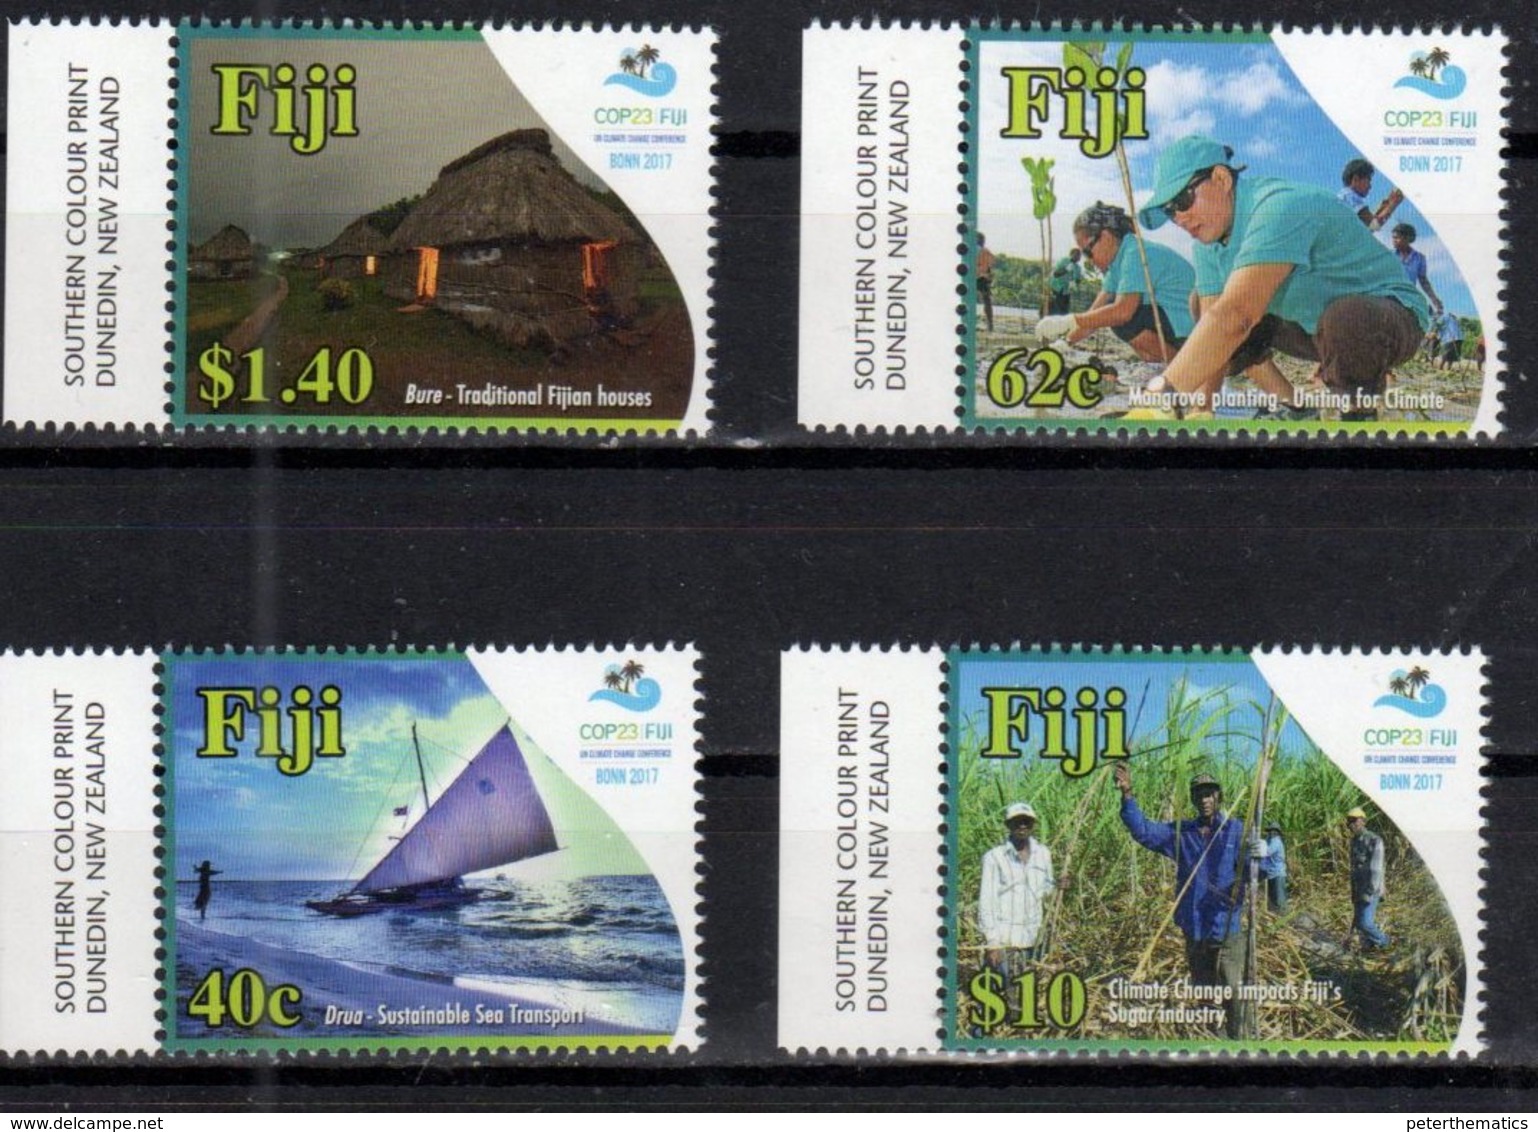 FIJI, 2018, MNH, COP23 FIJI, SAILBOATS, BOATS, ENVIRONMENT, CLIMATE CHANGE, AGRICULTURE,4v - Environment & Climate Protection